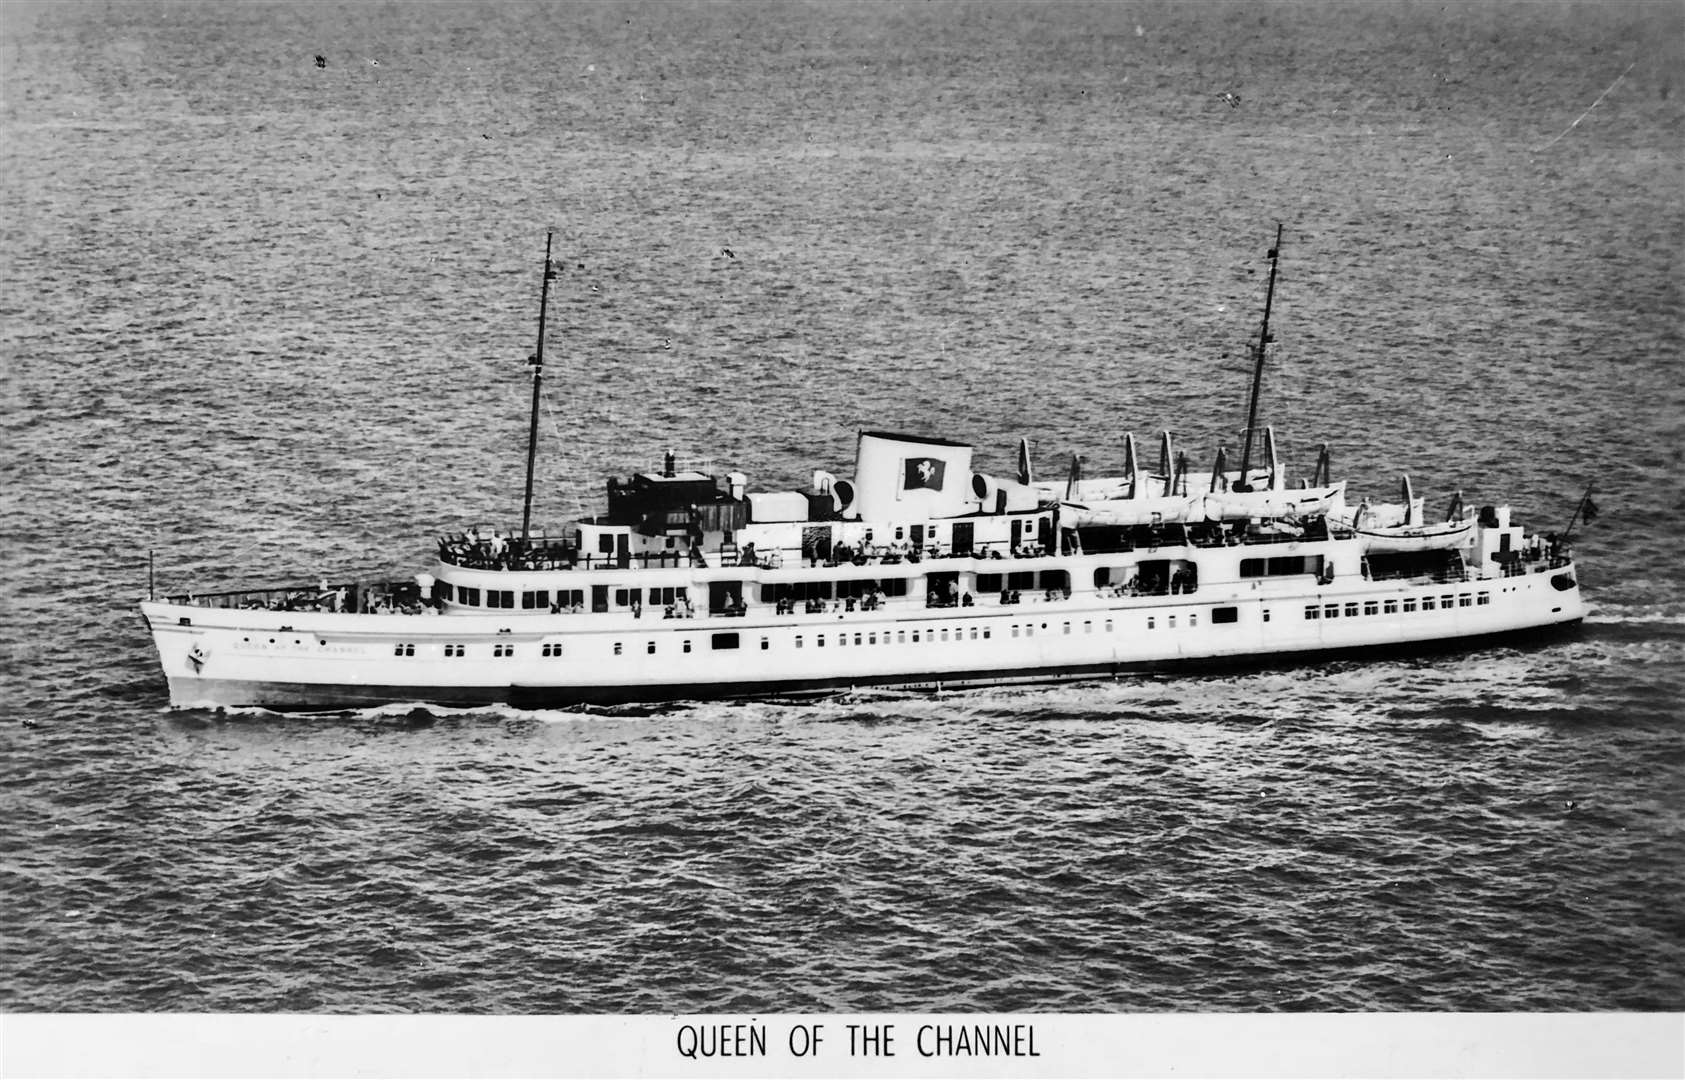 Queen of the Channel vessel (5431674)